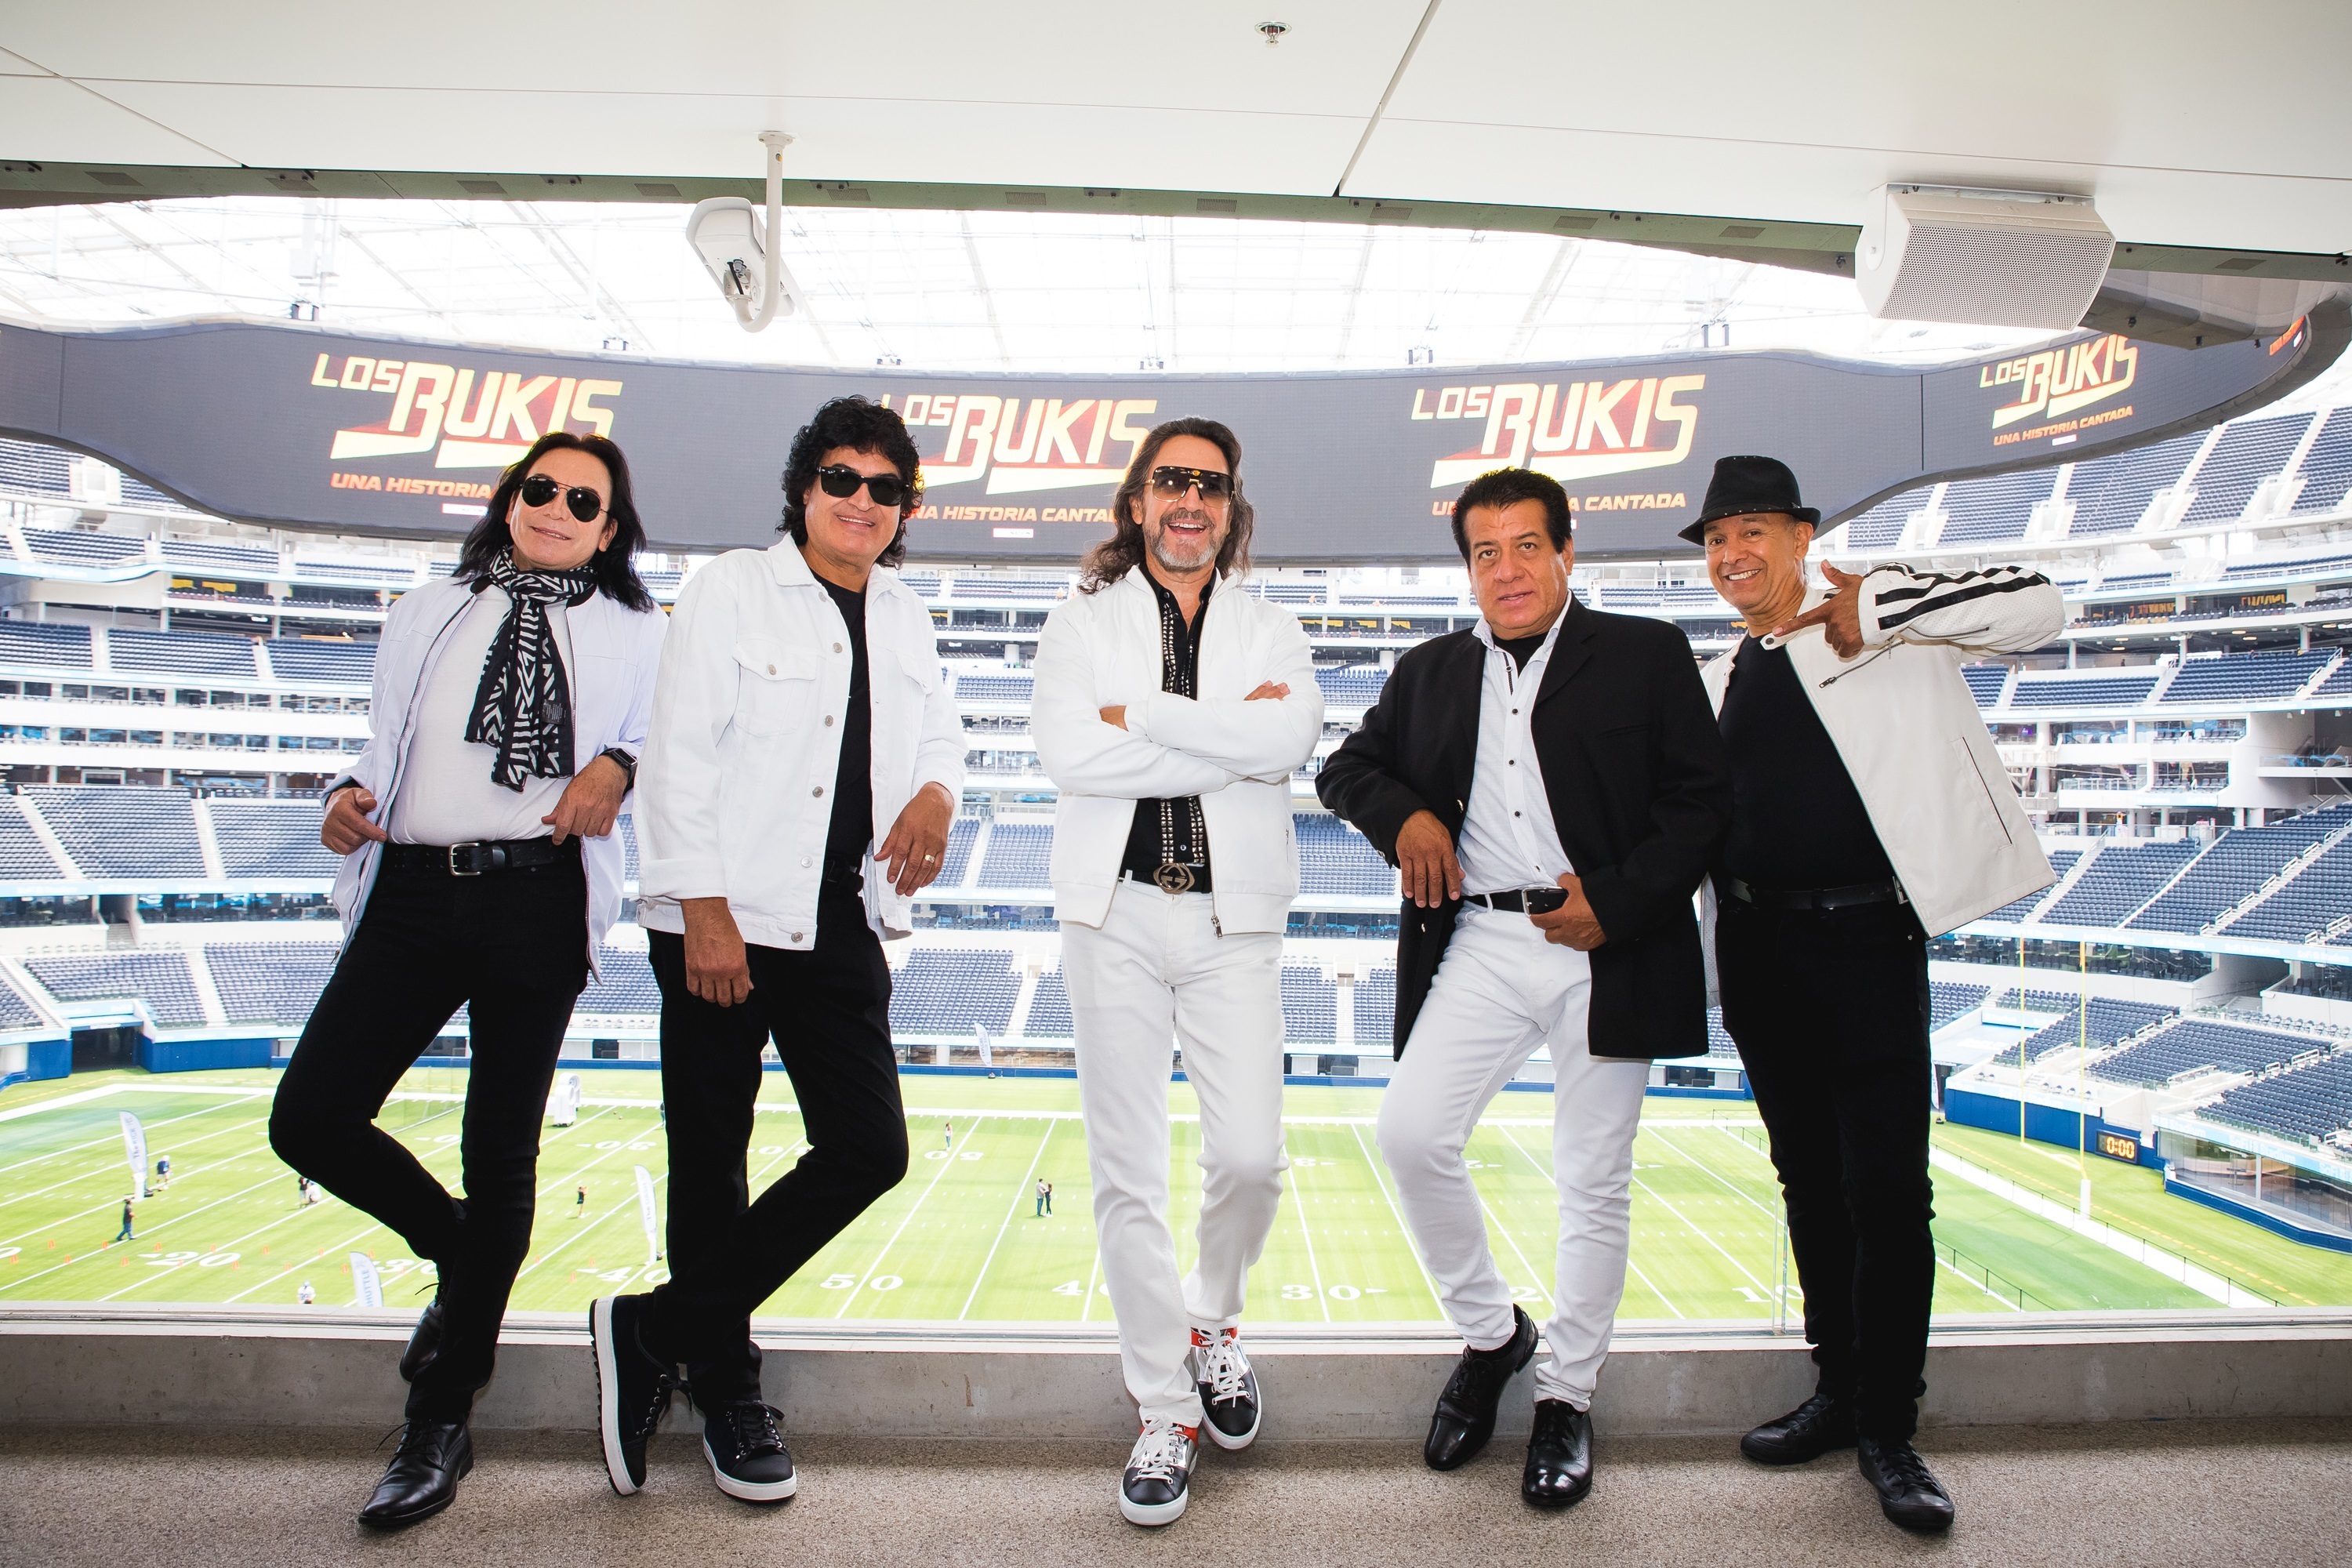 The Bukis opened a new date in Guadalajara: day, cost of tickets and everything you need to know